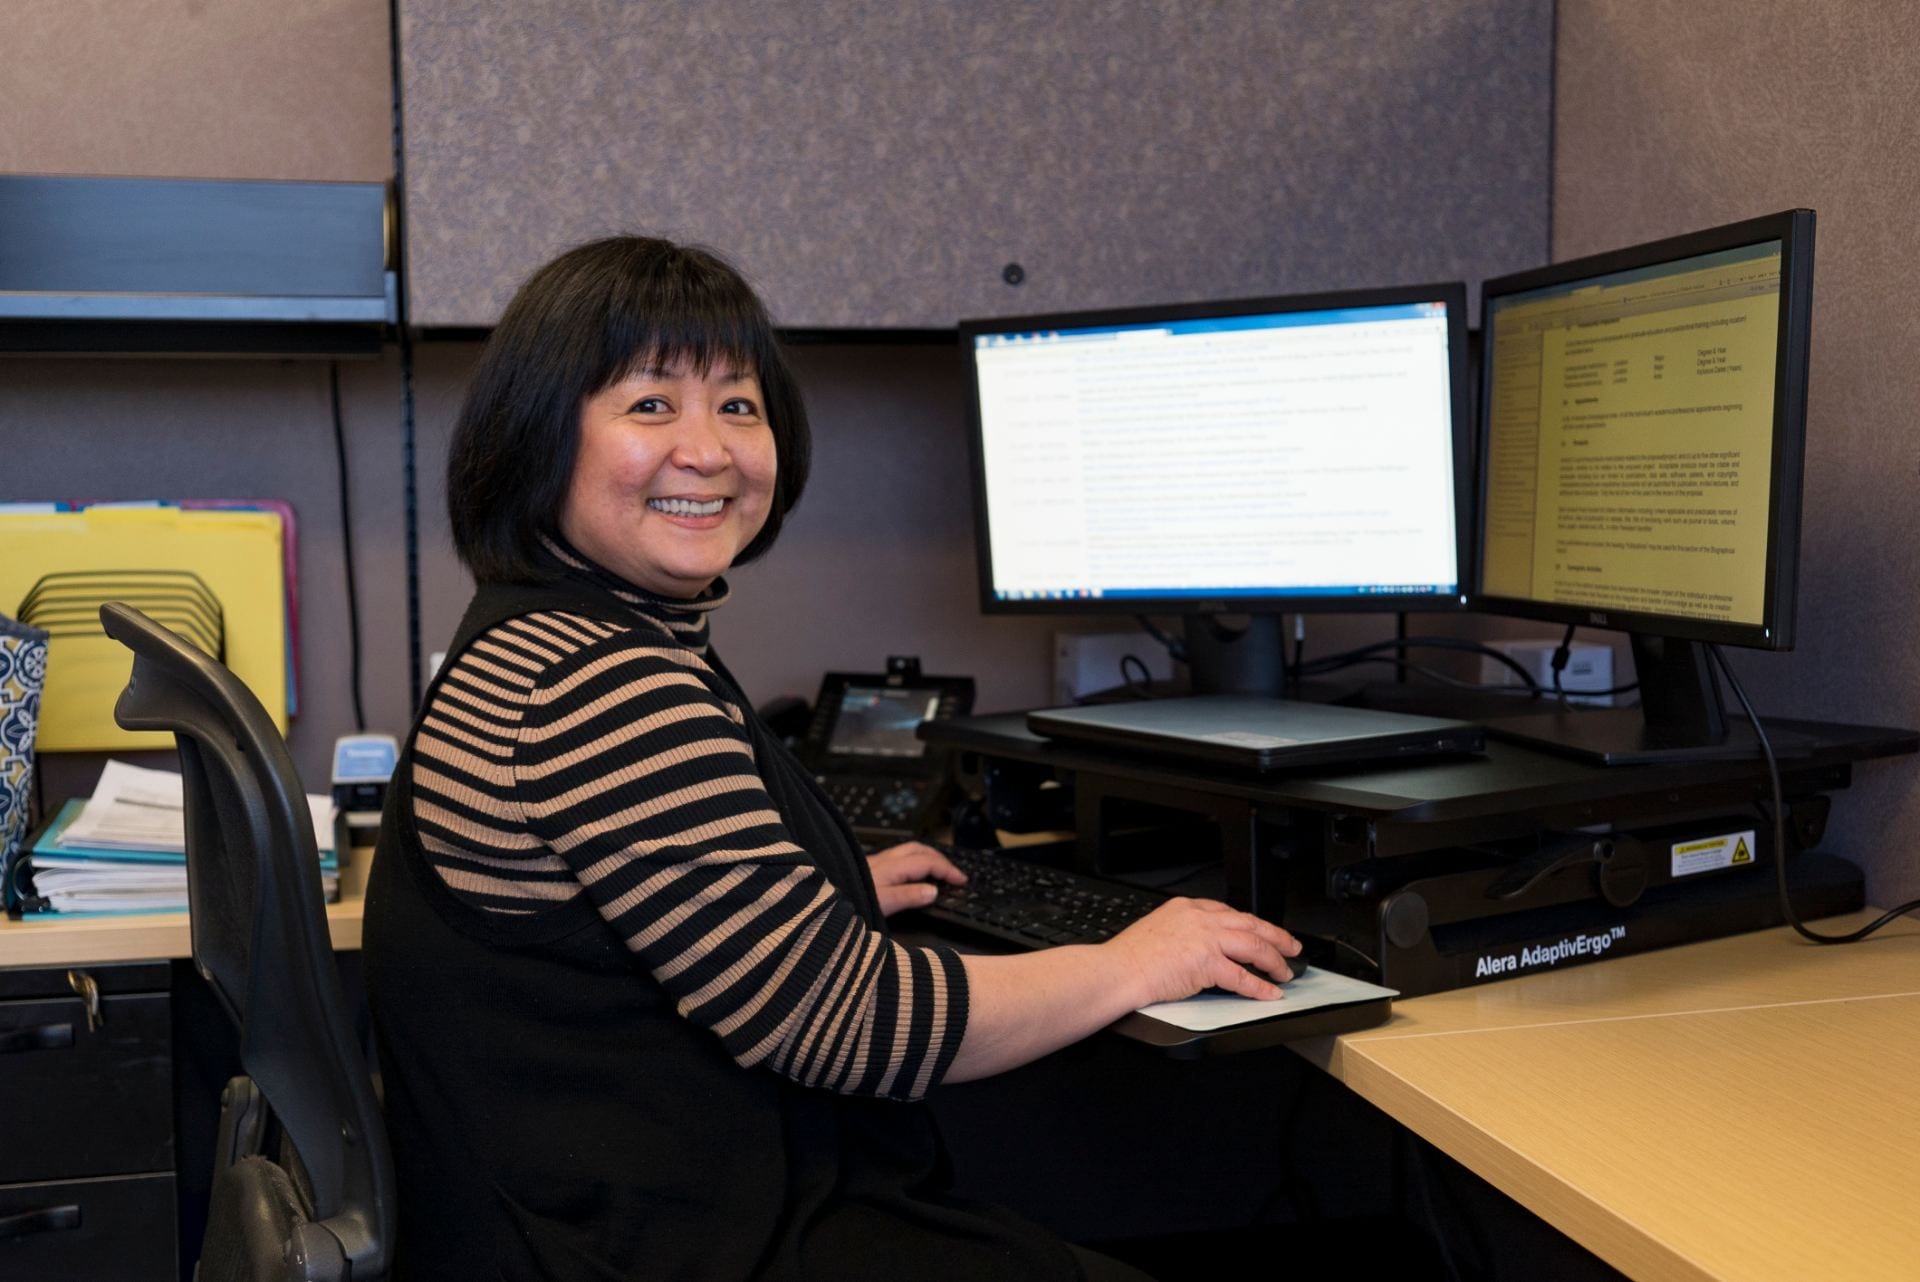 Diem Trang Vo works as a post-award manager at the SJSU Research Foundation.